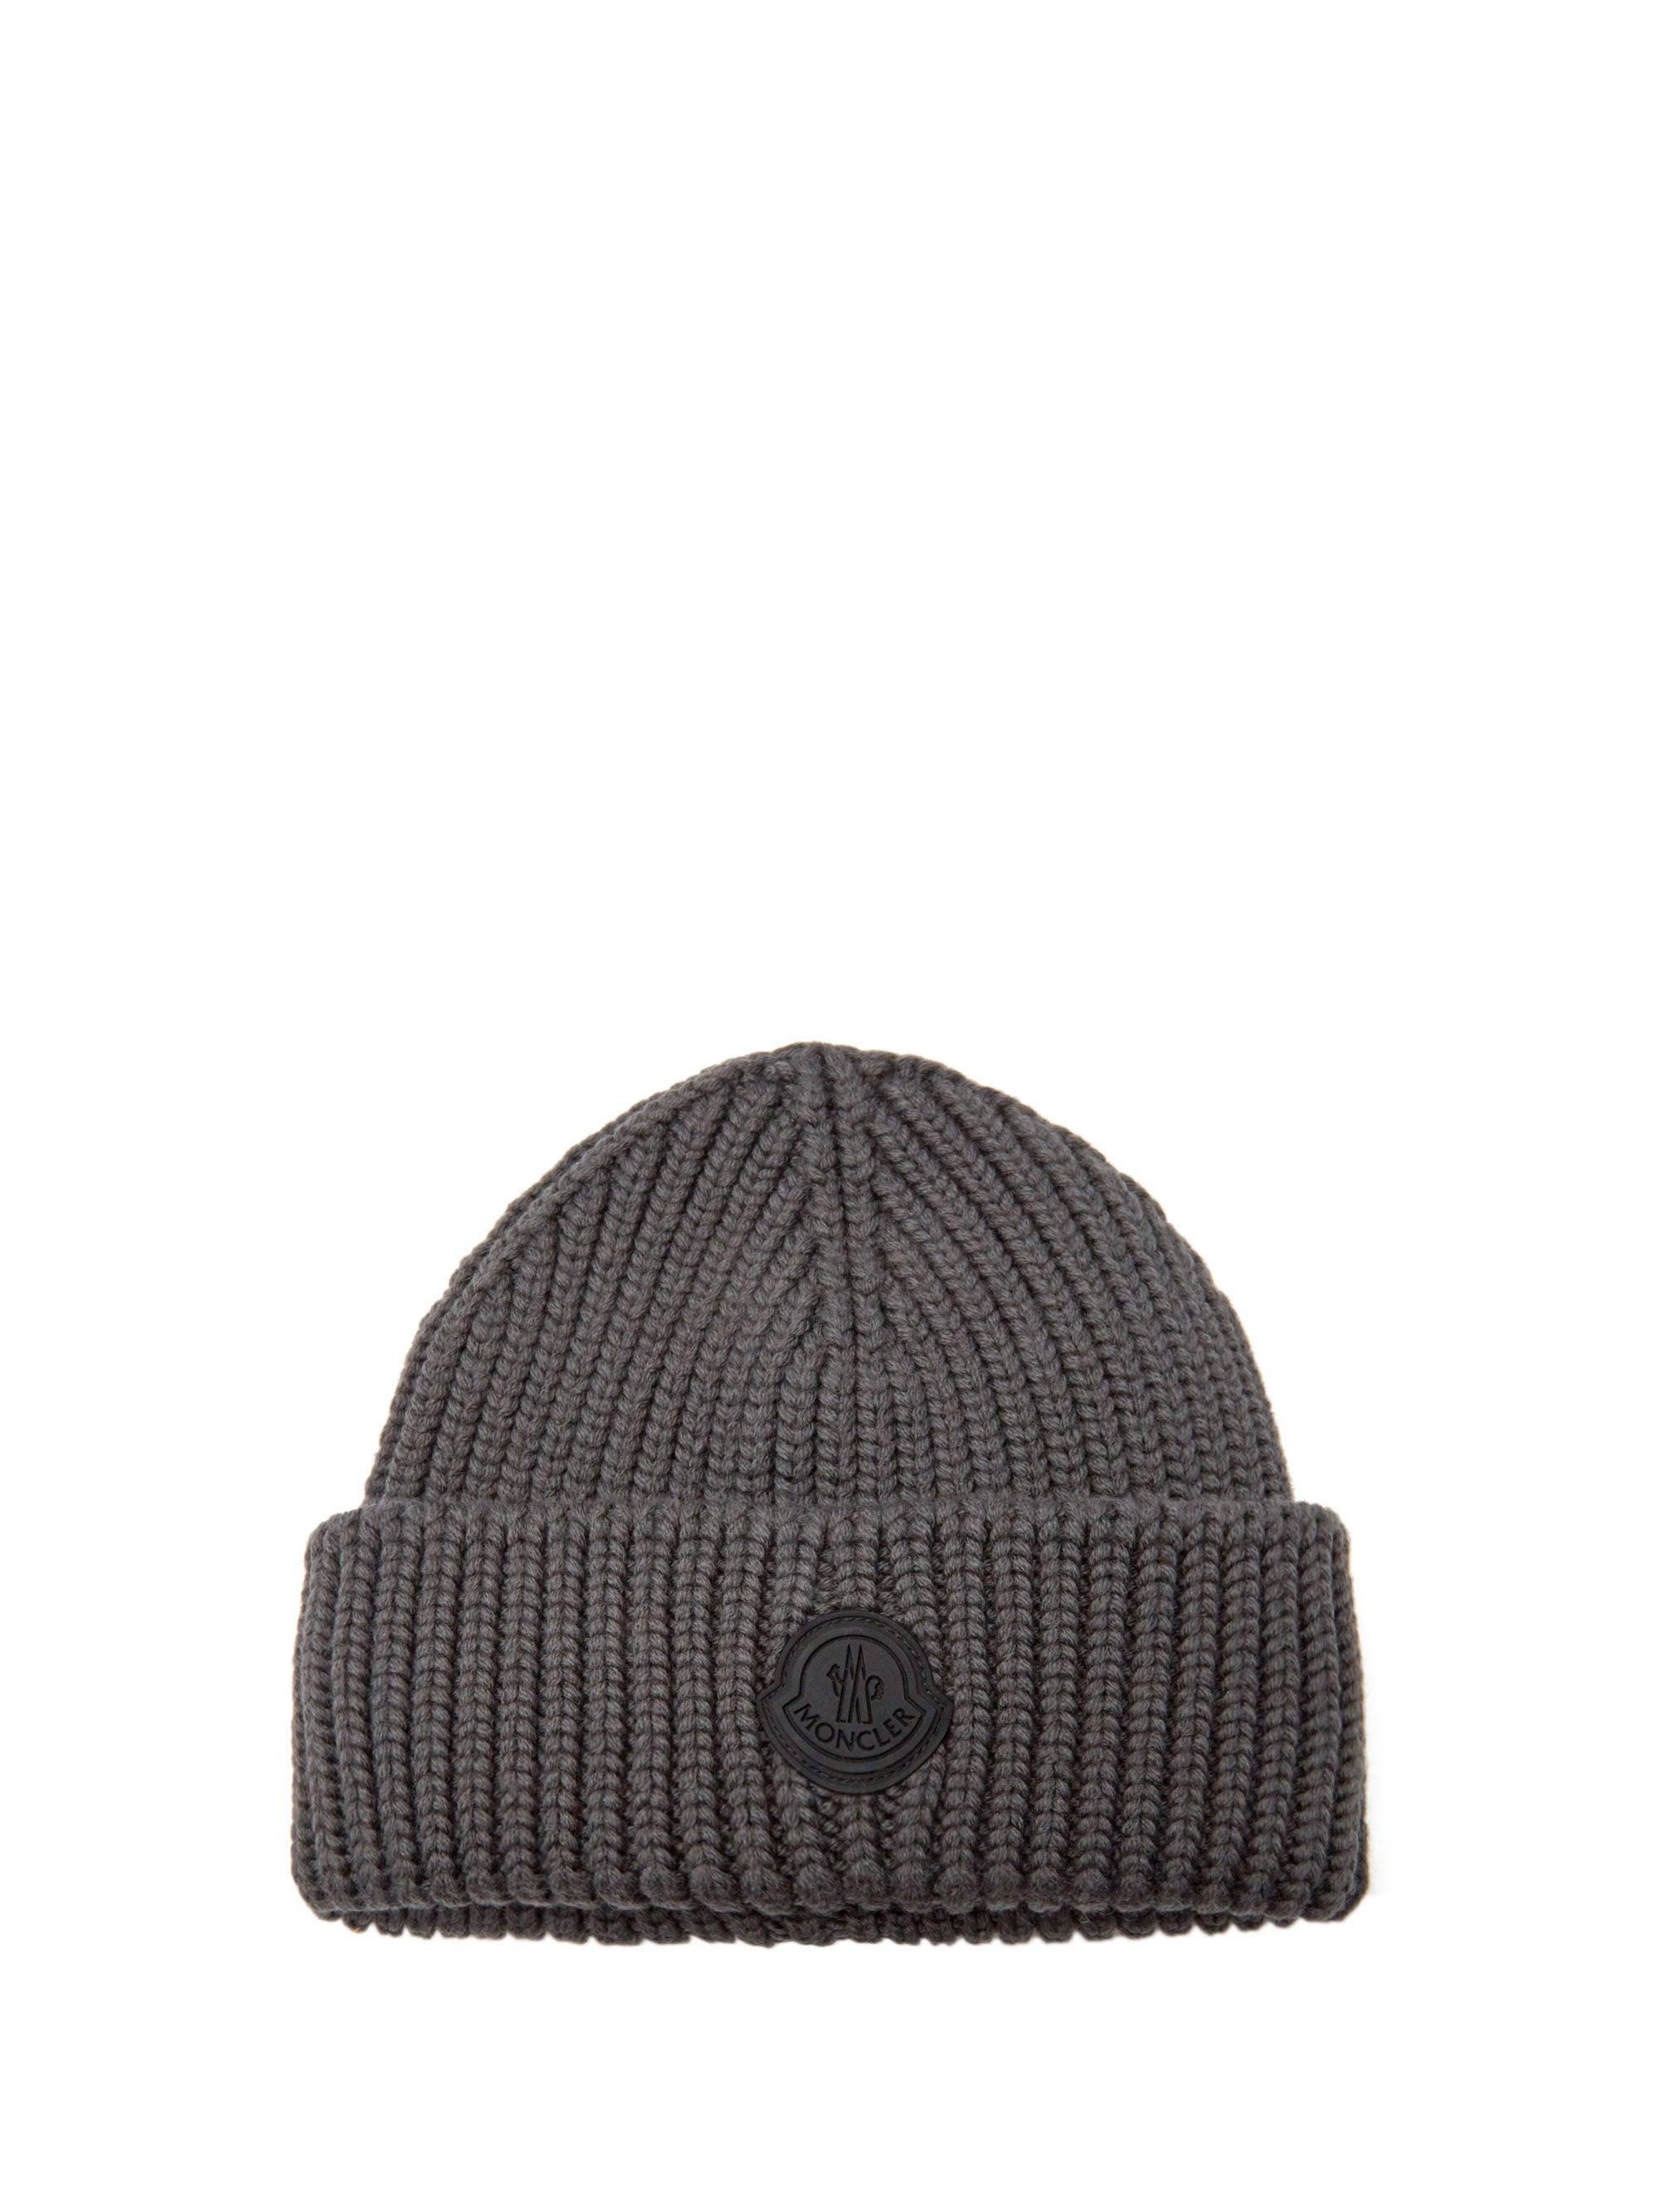 Moncler Rubber-logo Ribbed Wool Beanie Hat in Gray for Men | Lyst